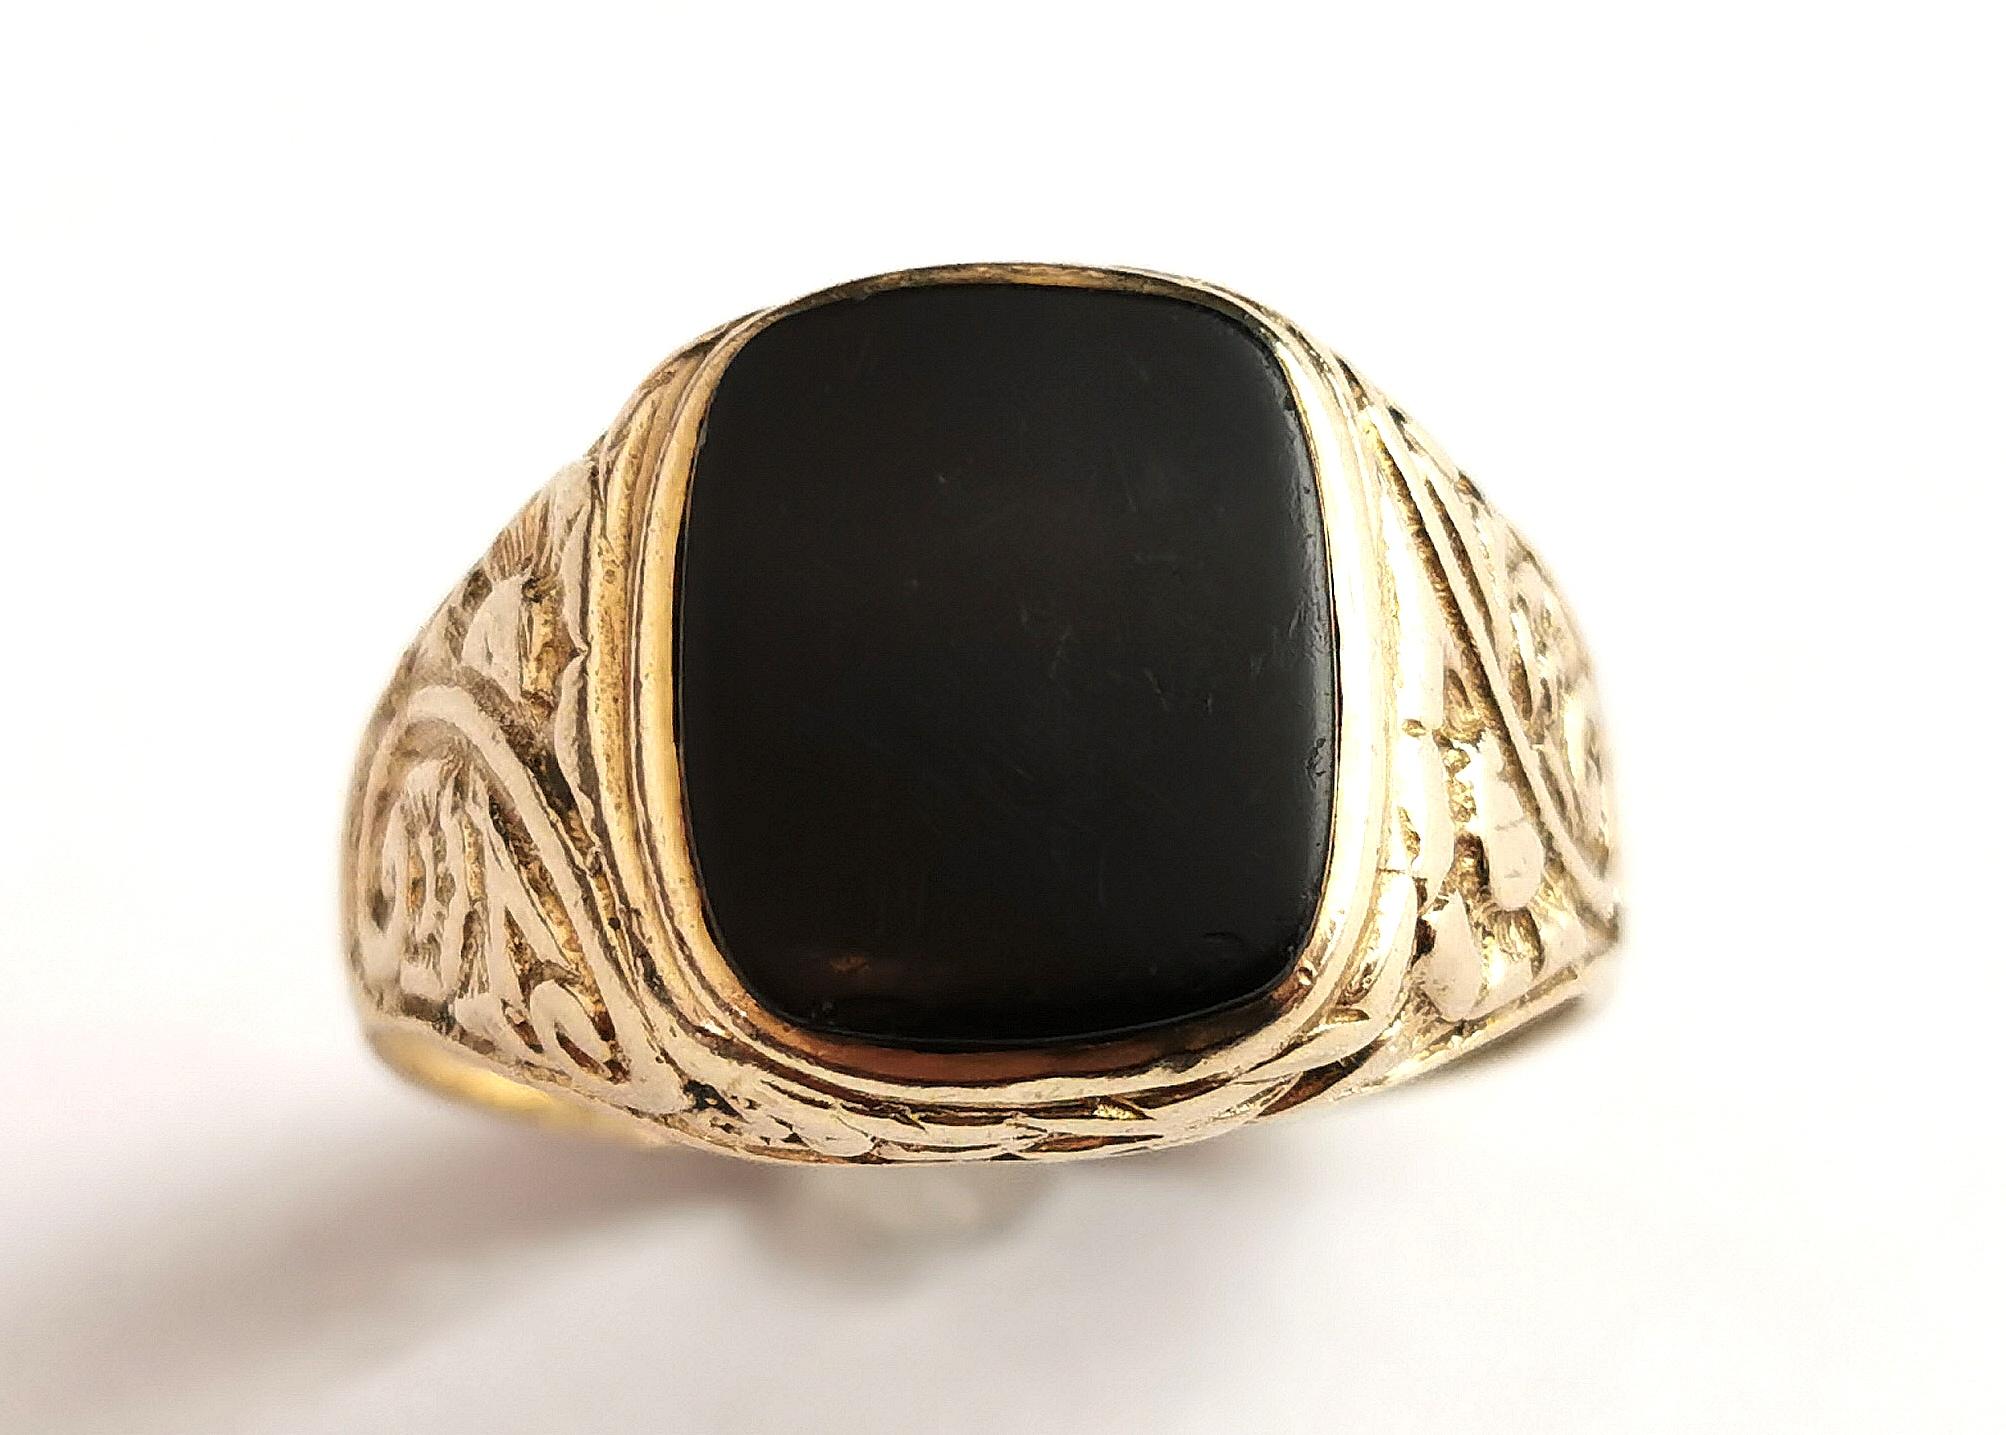 Vintage Onyx signet ring, 9k yellow gold, floral engraved  7